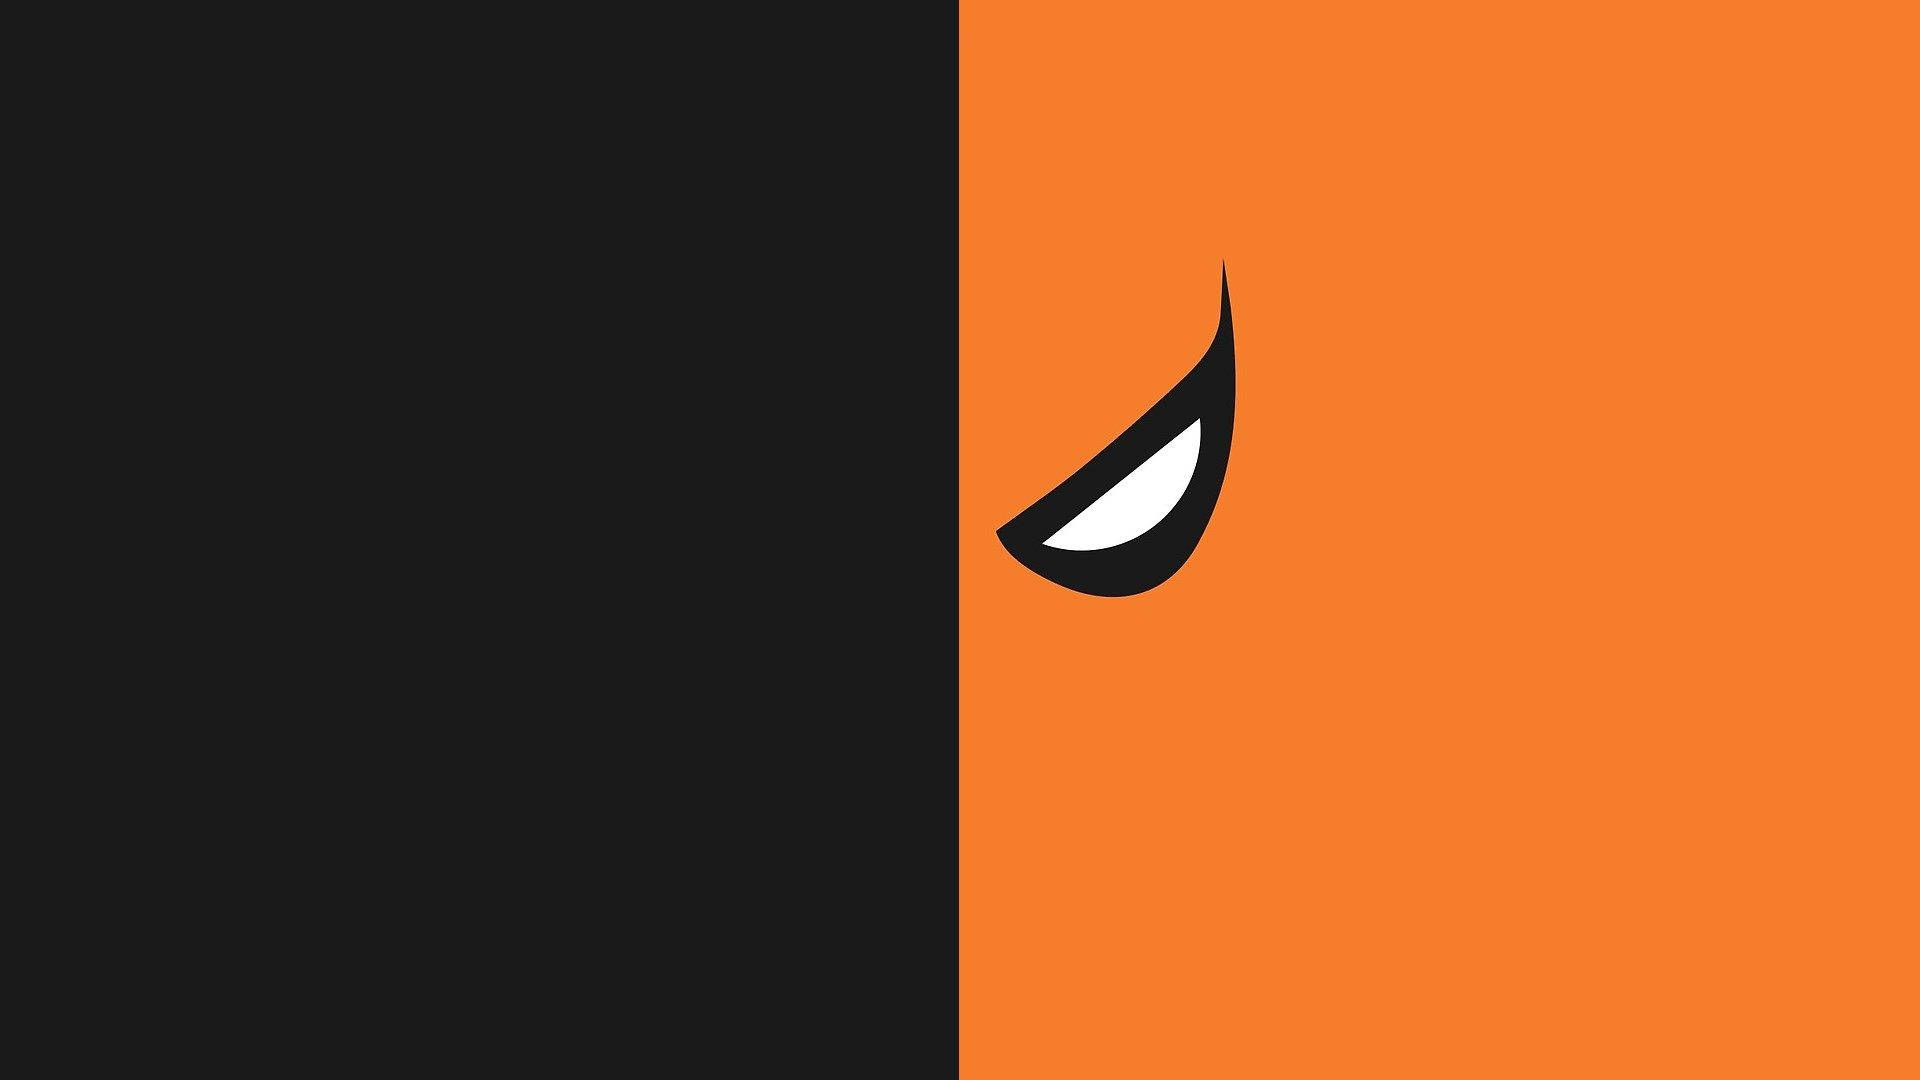 A Spider - Man Logo With An Orange And Black Background Background